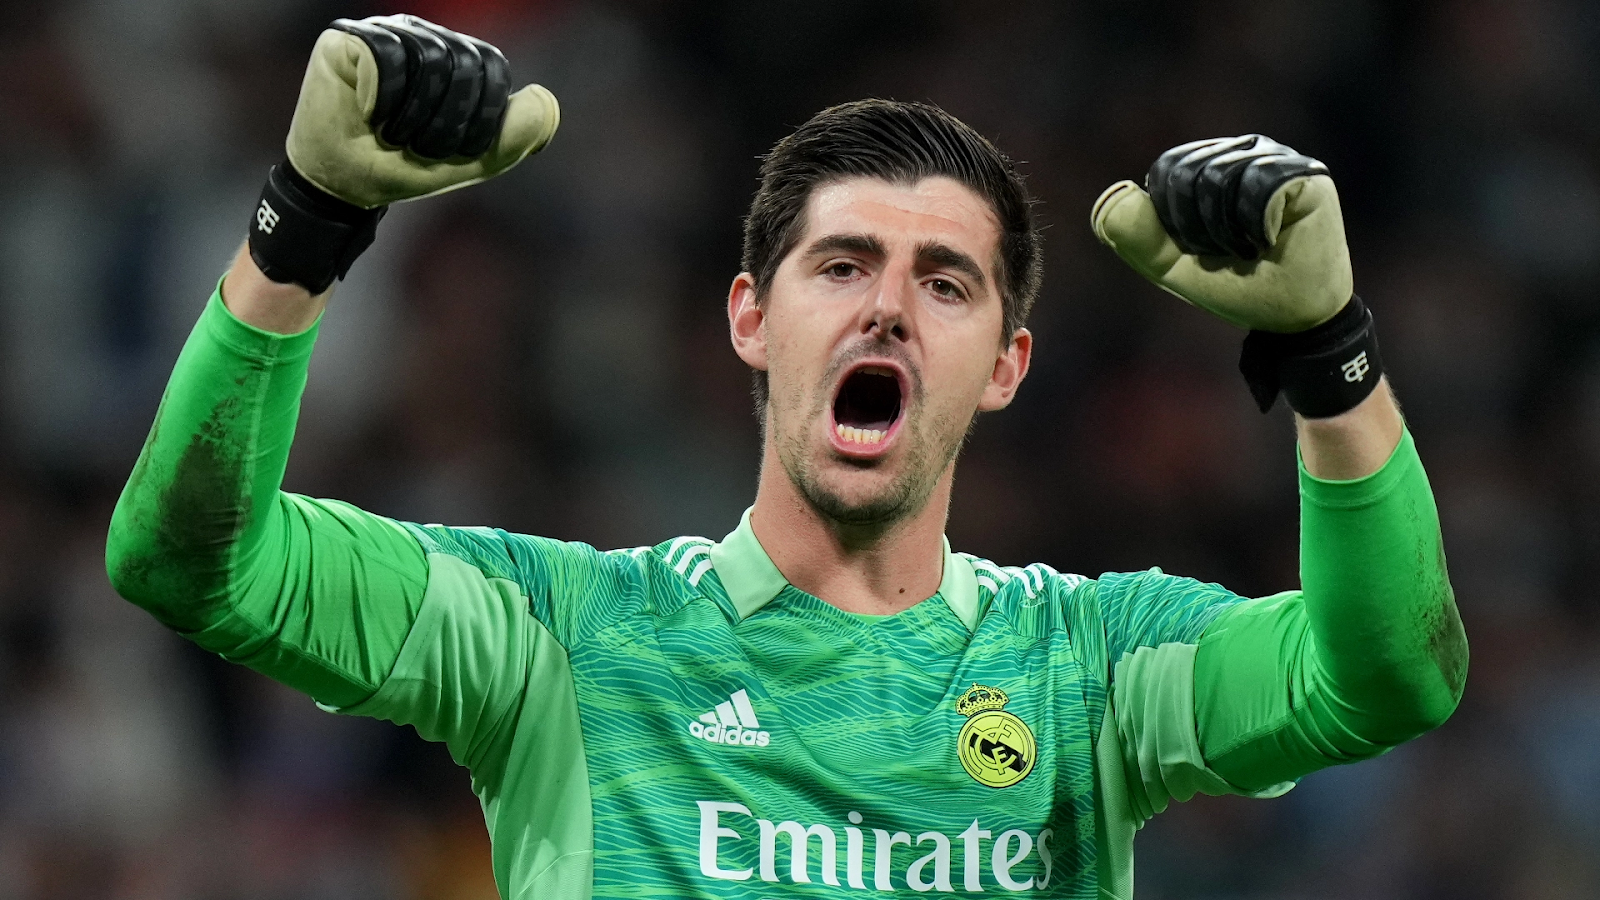 Courtois made 55 saves in just 13 games